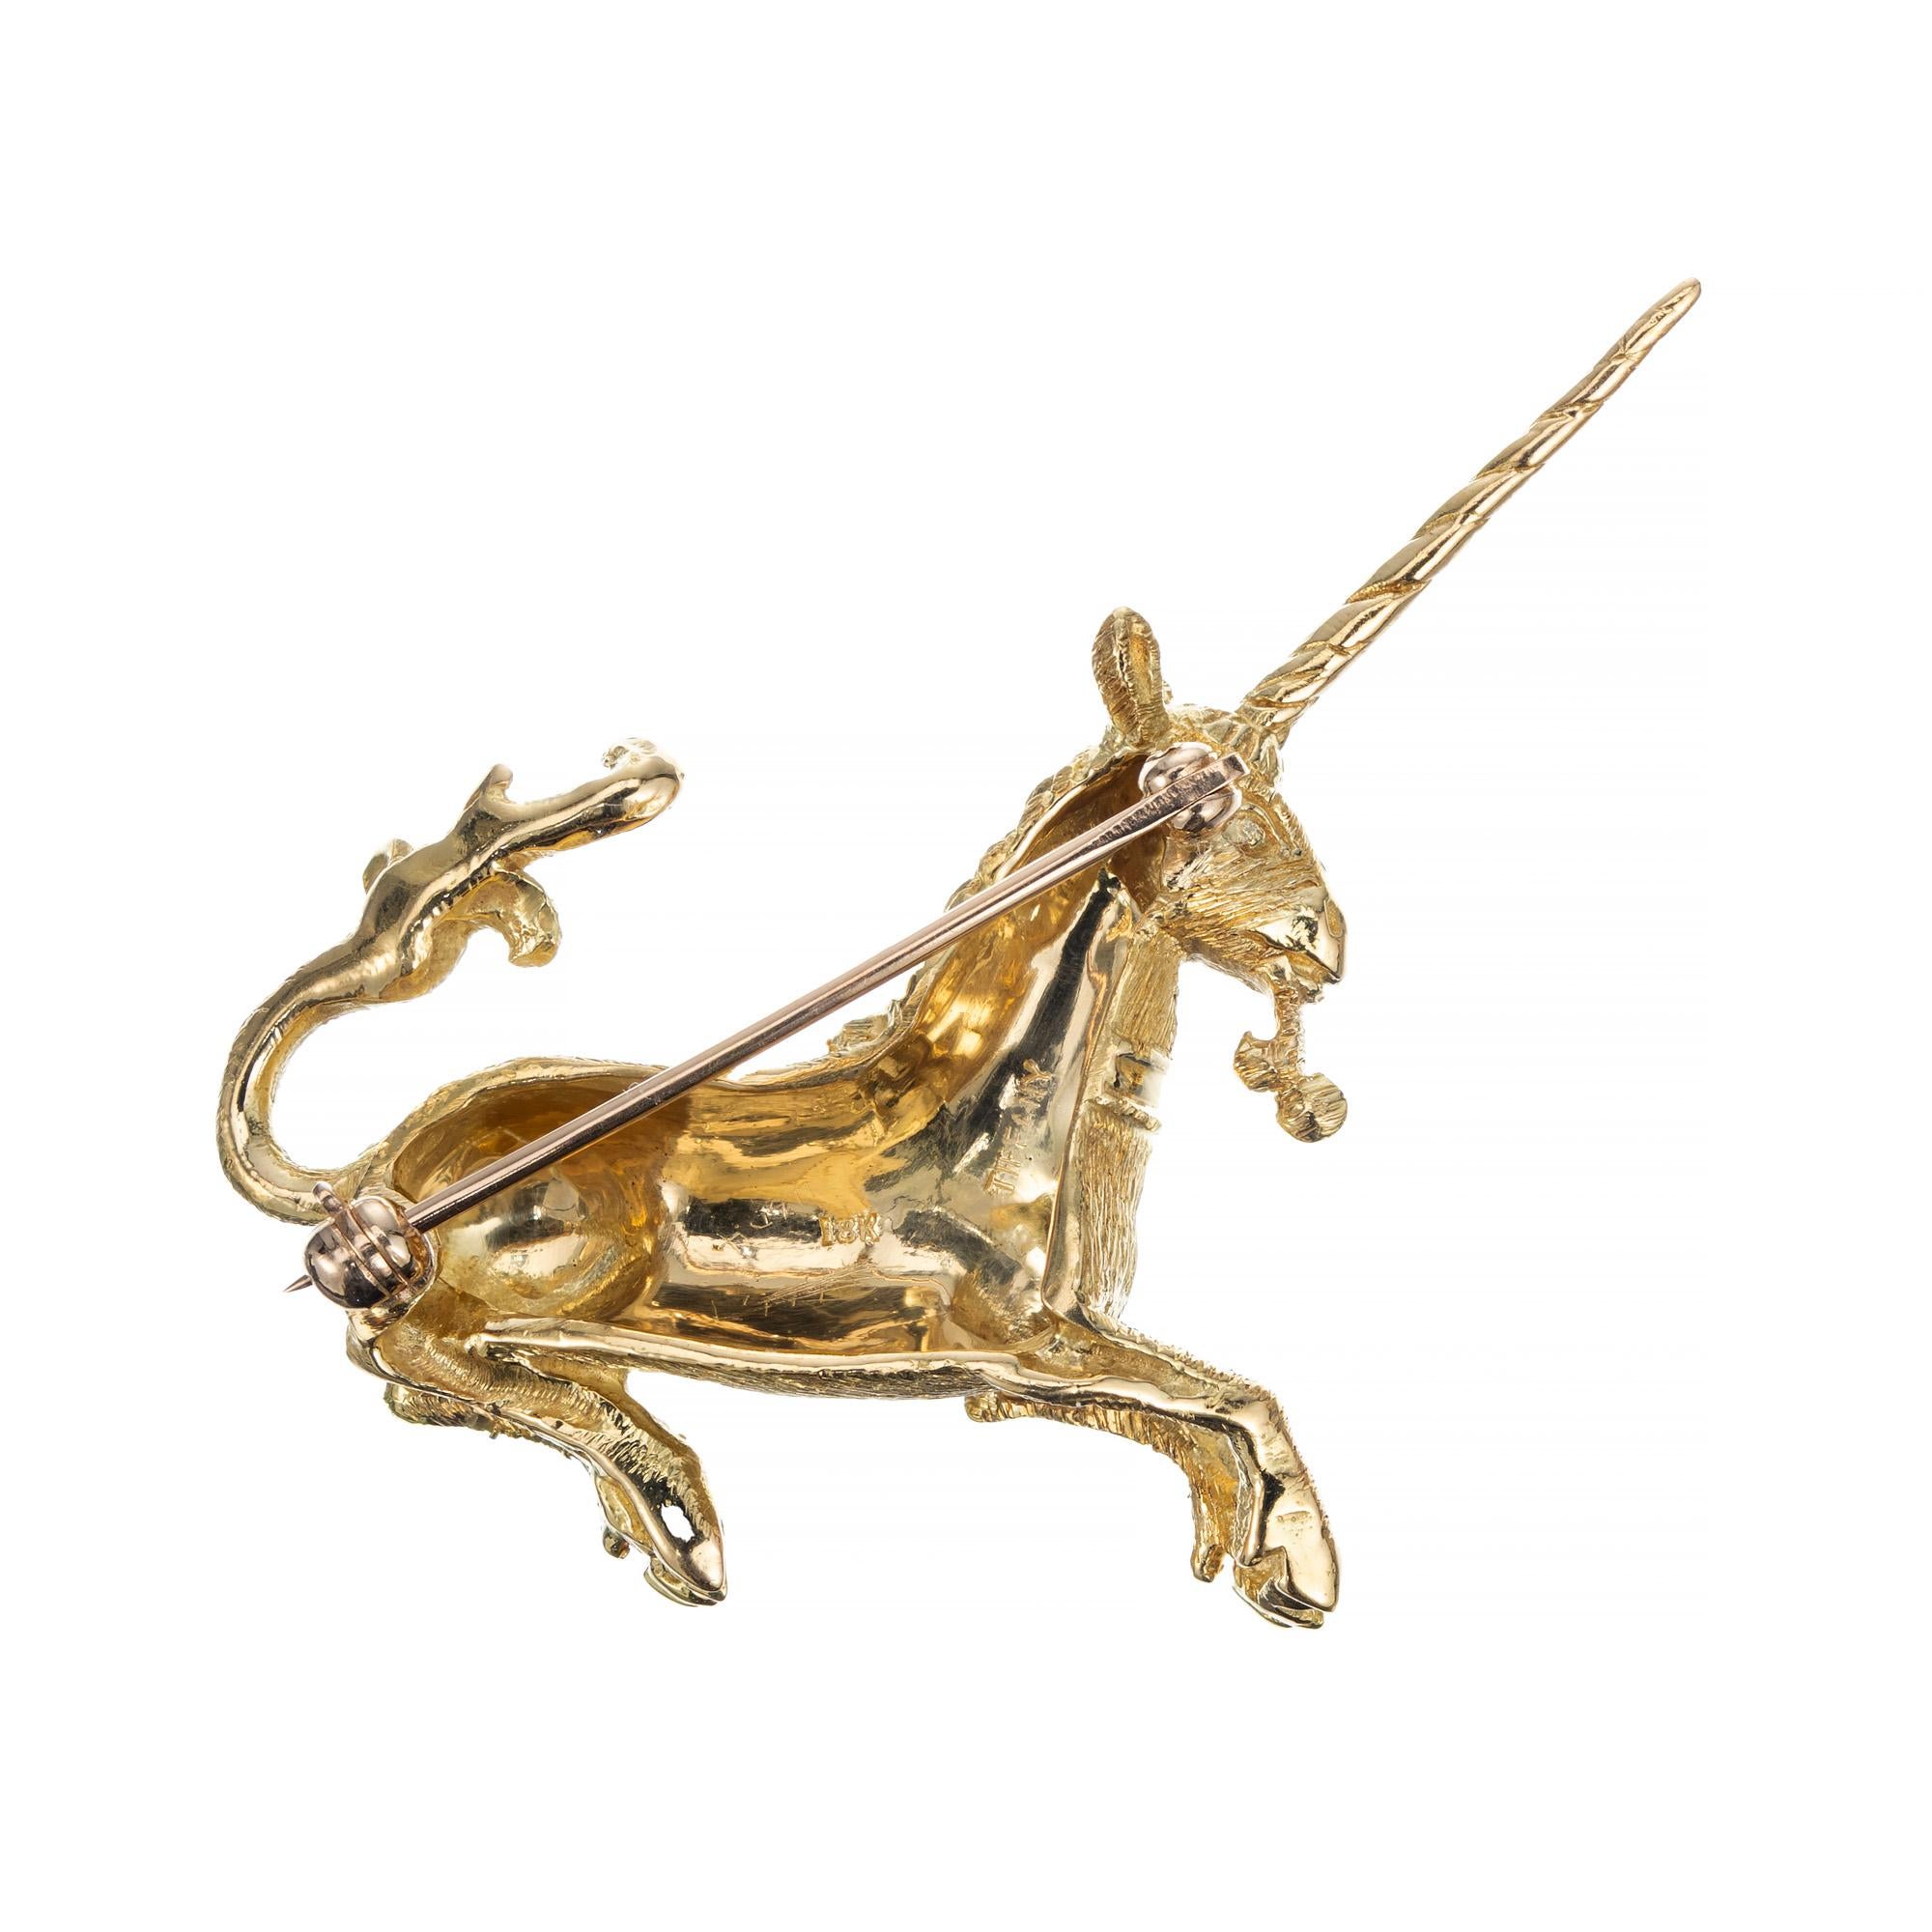 Vintage 1970's Tiffany & Co. rare unicorn brooch. Crafted in solid textured 18k yellow gold this beautiful design is accented with one round cut ruby. Highly detailed with the excellent workmanship of Tiffany's. 

1 round red ruby, approx. .1ct
18k